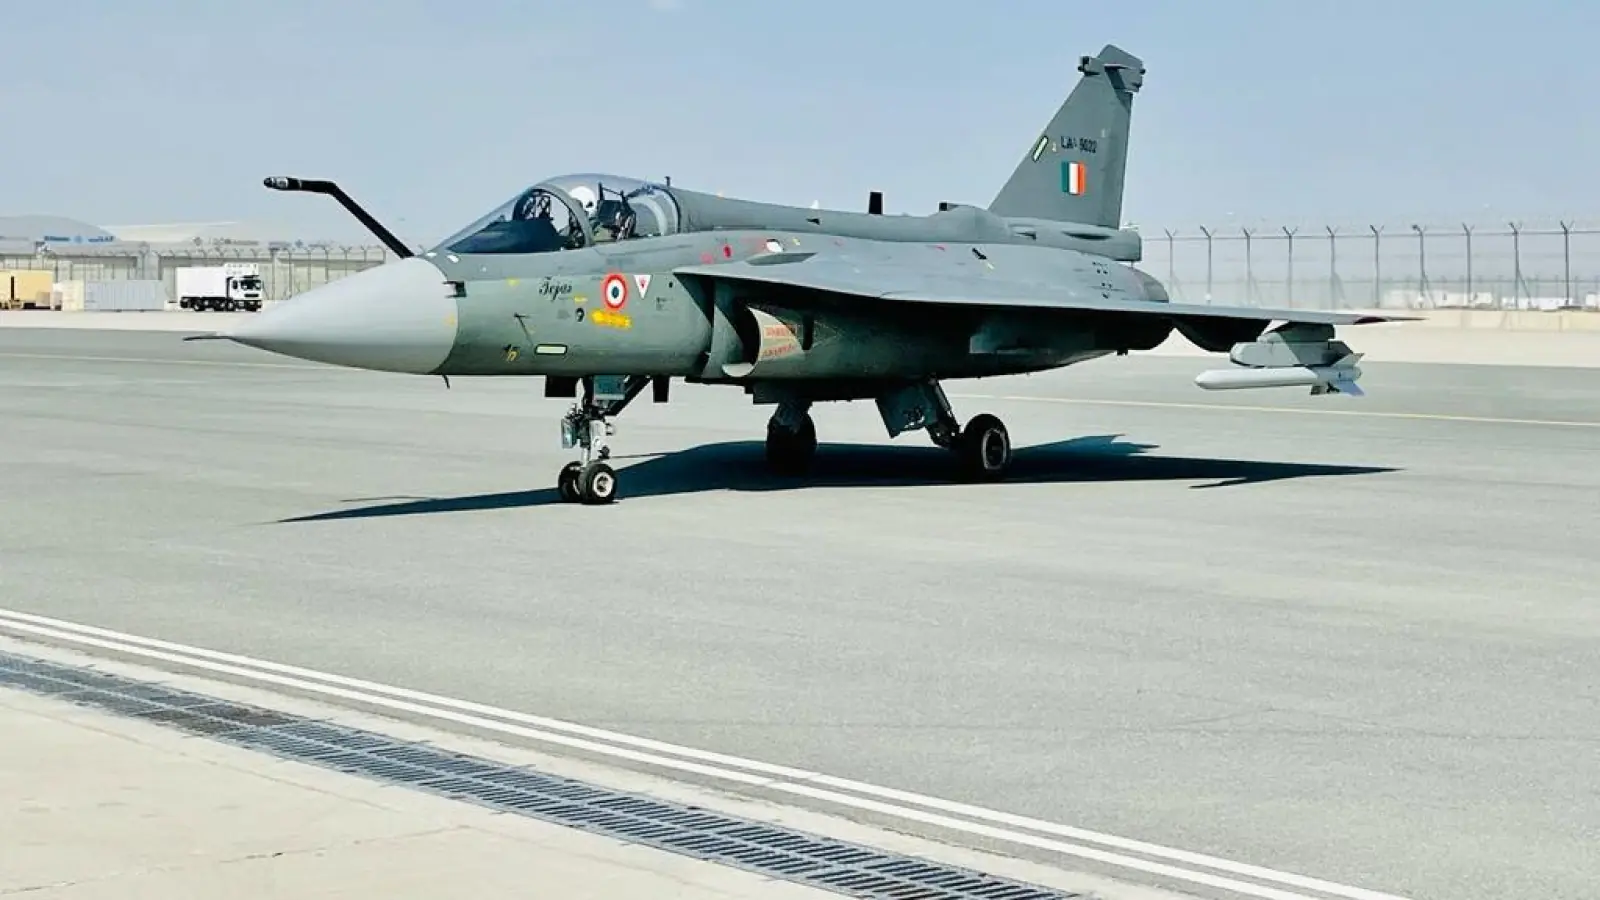 Tejas Mk-1A: Air Force's capacity will double, enemies will tremble after seeing the new Tejas fighter aircraft